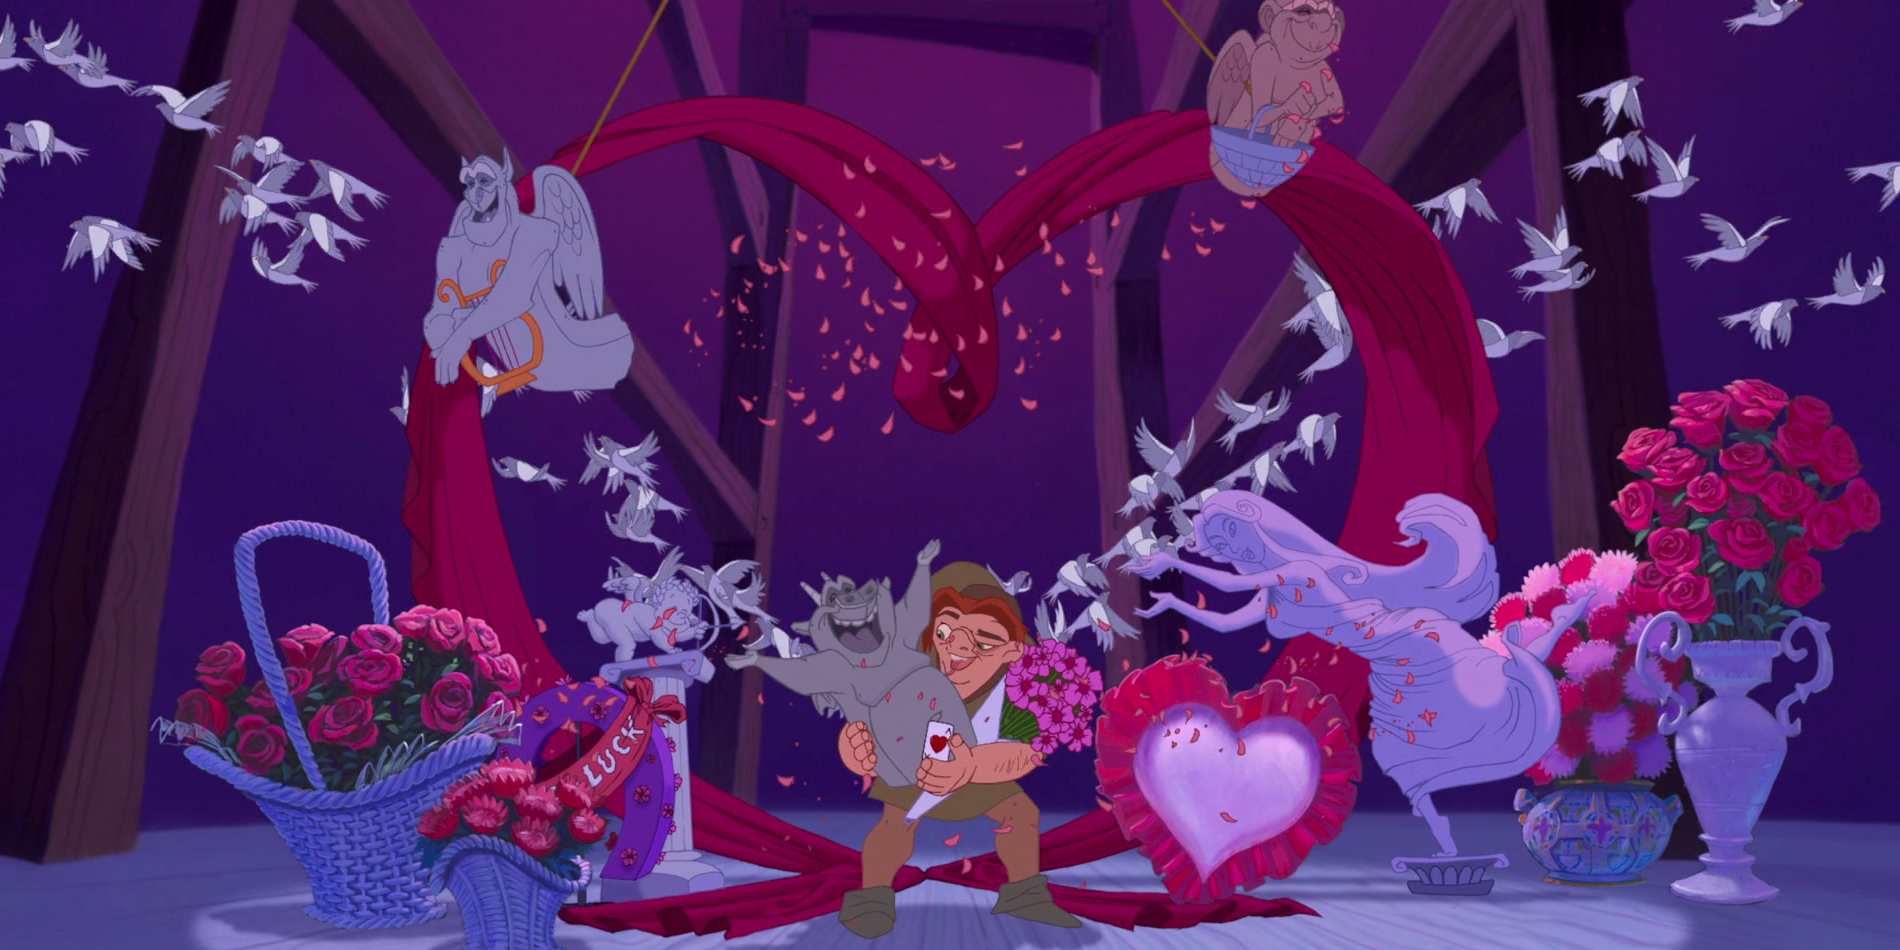 Disney+: Every Song From The Hunchback Of Notre Dame, Ranked From Worst To Best